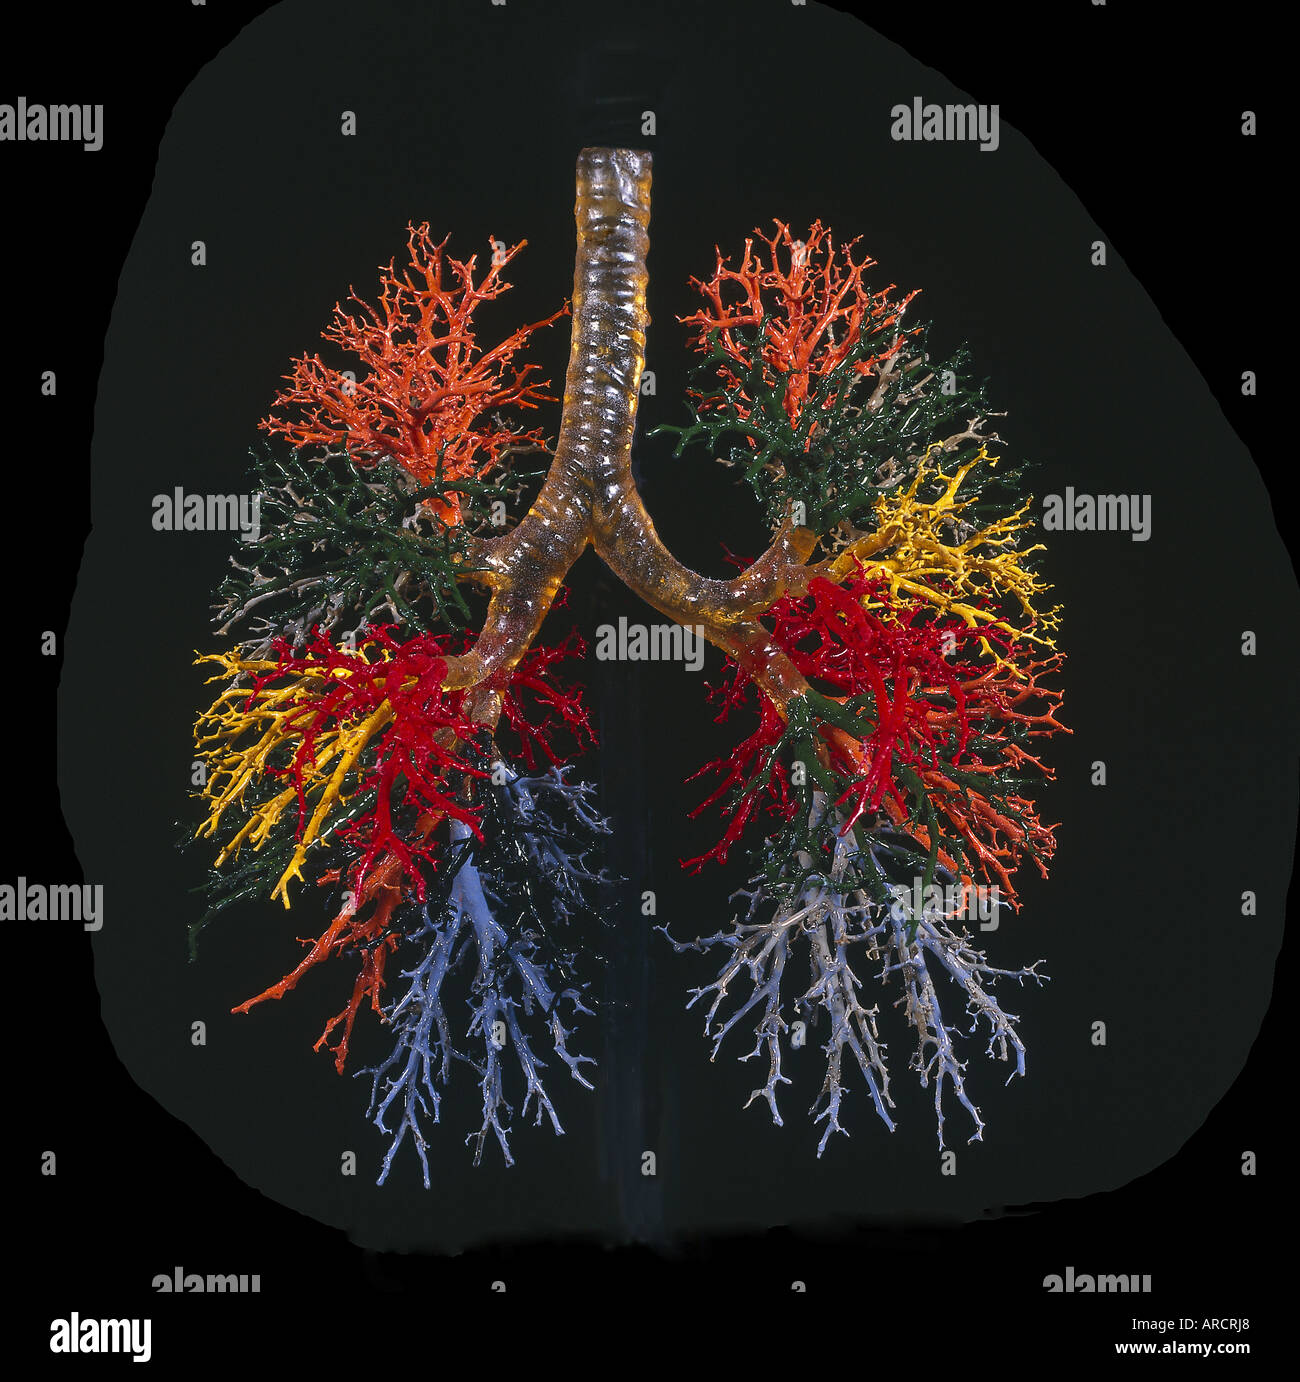 A photograph of a cast of the respiratory tract showing the lungs, bronchi, trachea, and bronchioles. Stock Photo